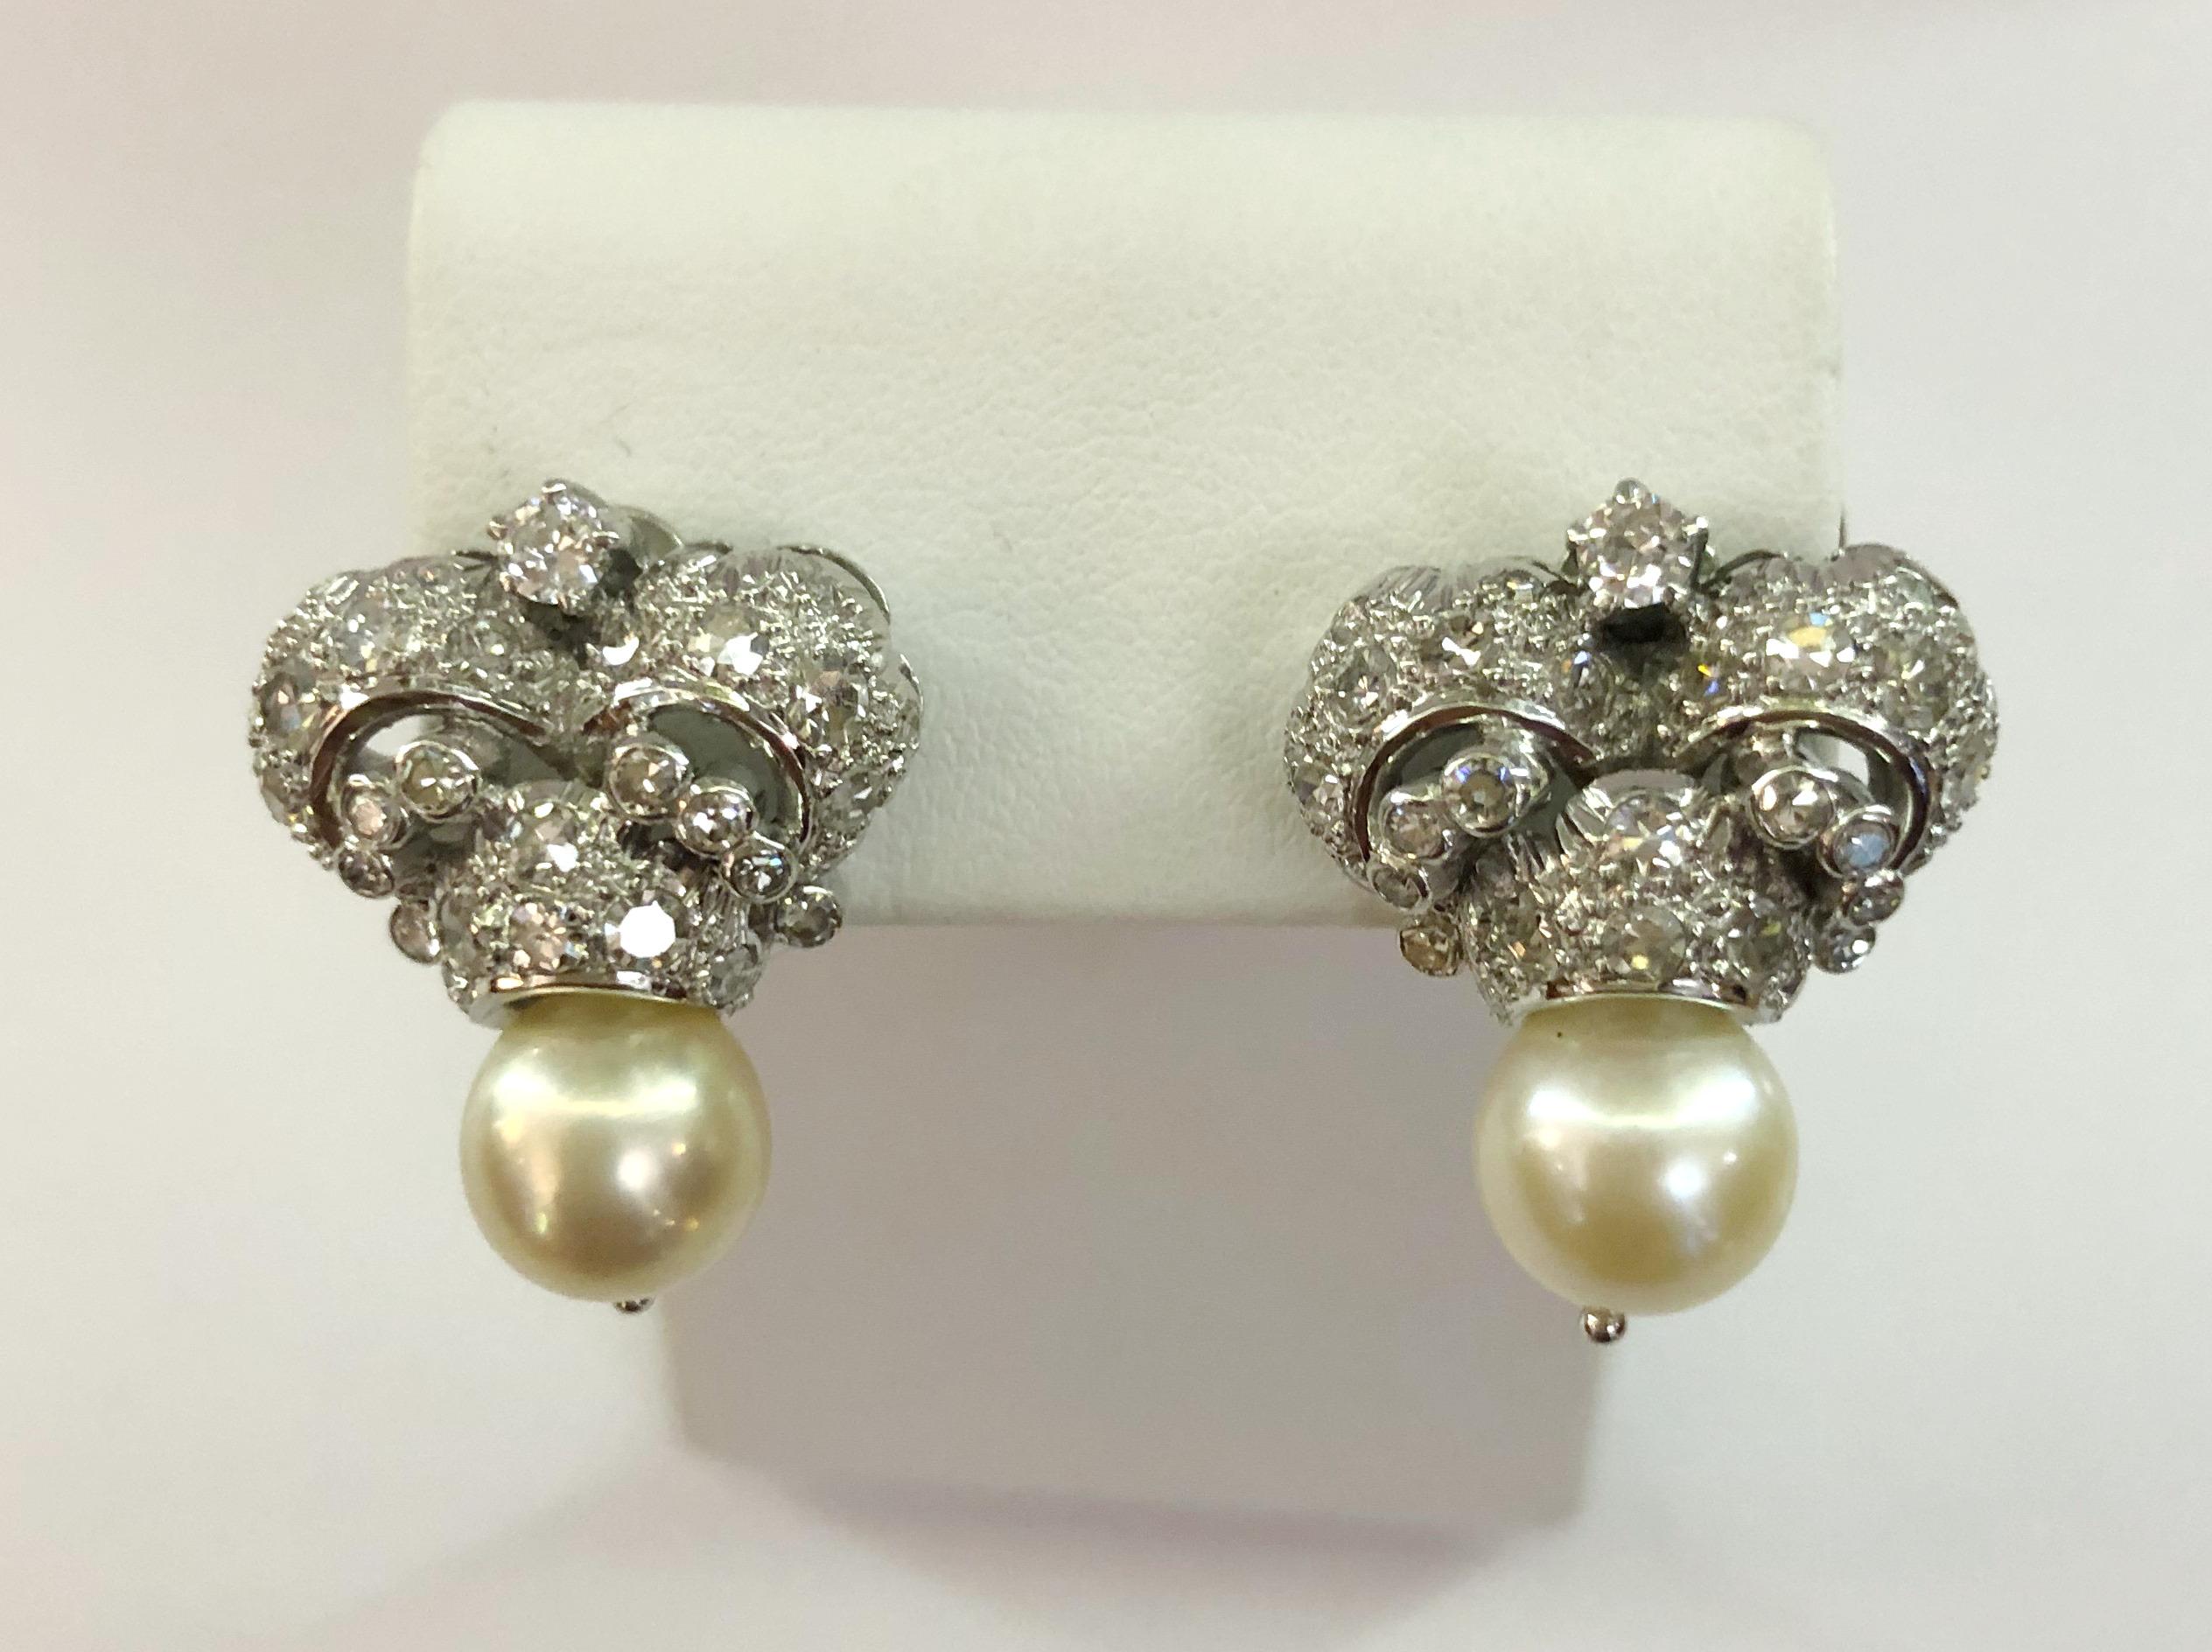 Pair of vintage crown 18 karat white gold earrings with pearls and brilliant diamonds in Pave setting, Italy 1950-1960s